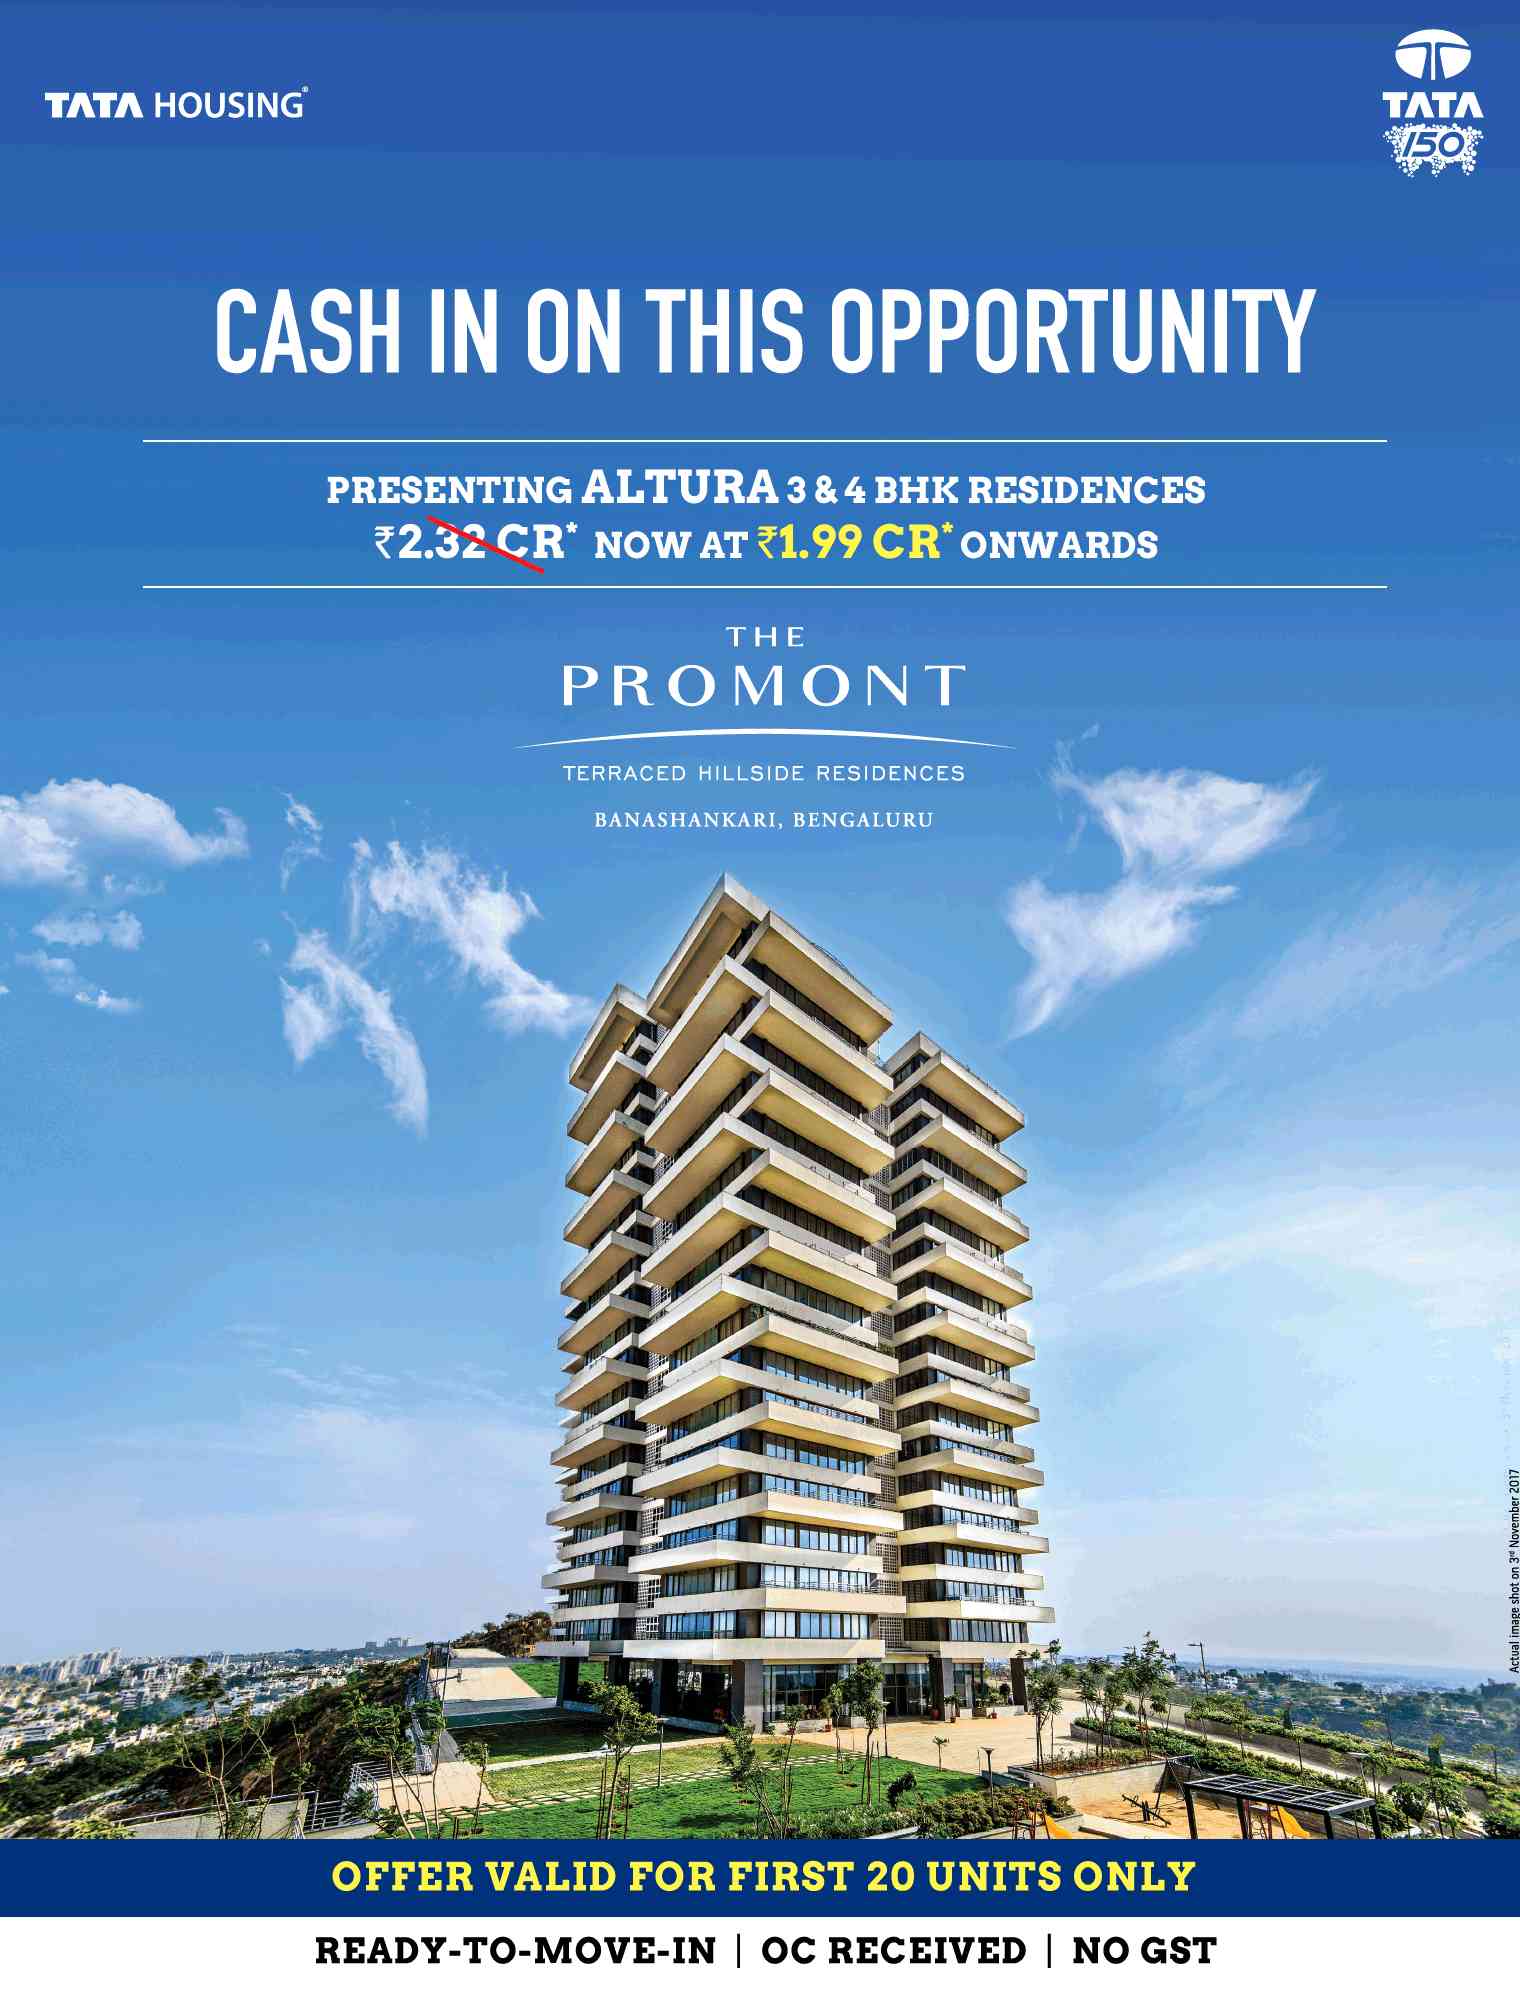 Presenting Altura 3 & 4 BHK residences @ Rs 1.99 cr at Tata The Promont in Bangalore Update